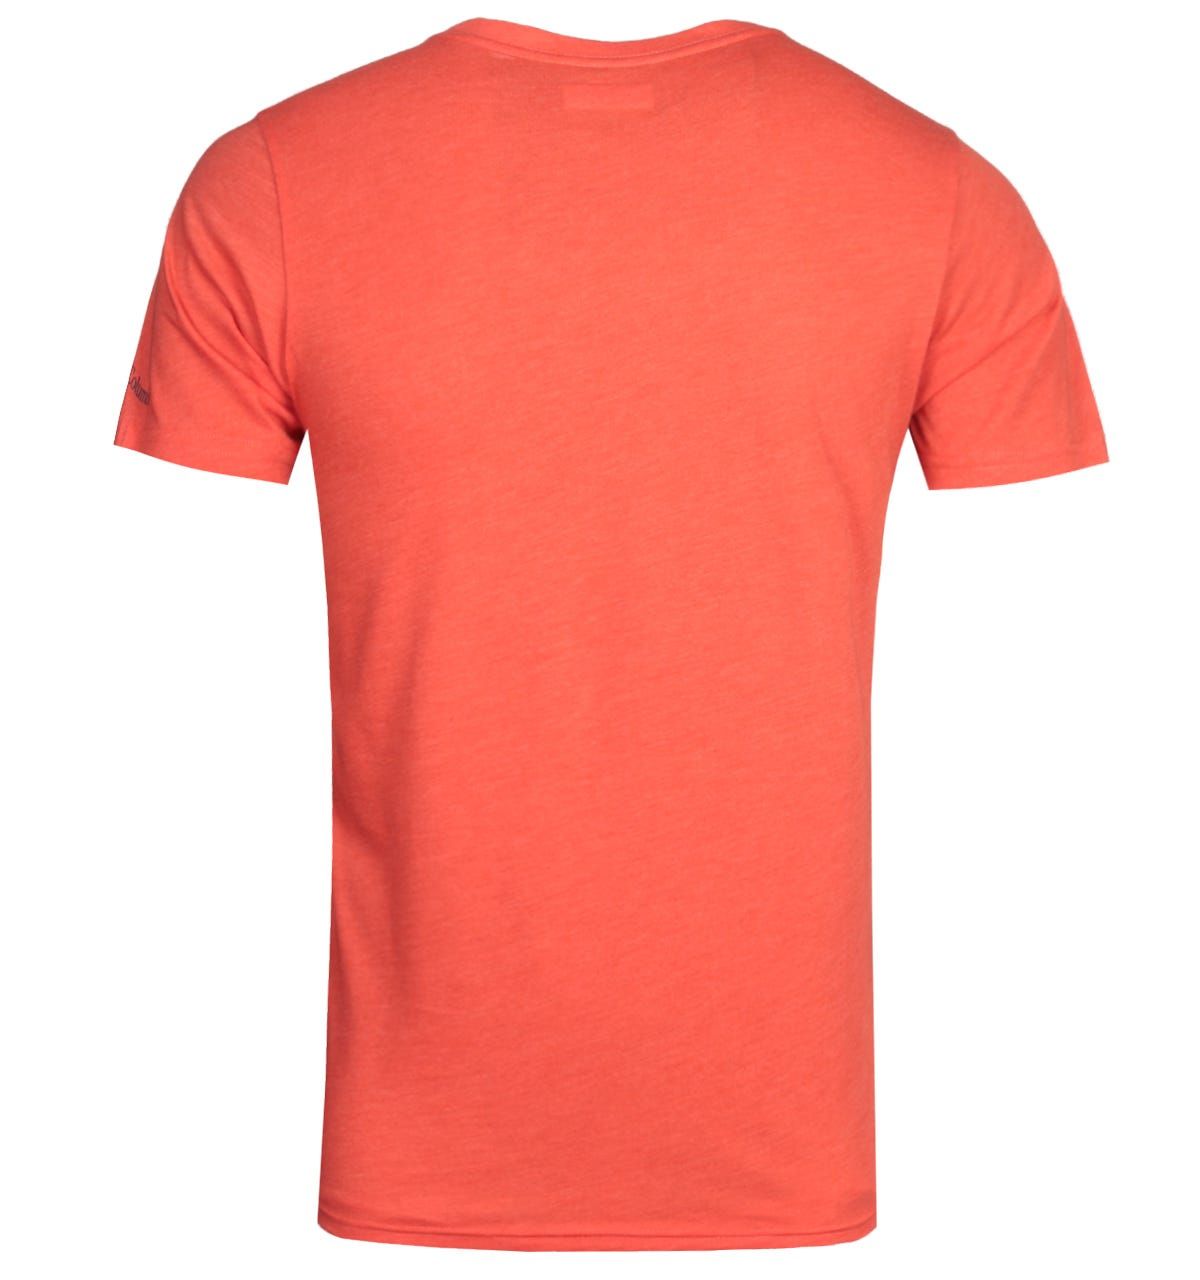 <p>This is the Alpine Way Graphic T-Shirt in Wildfire Peak Fun by Columbia. Columbia Sportswear is a global outdoor brand based in Portland. They specialise in crafting active lifestyle gear with industry leading technologies. Columbia\'s apparel, footwear, and accessories reflect their Pacific Northwest heritage and indomitable spirit.</p><ul><li>Front Logo</li><li>Crew neck collar</li><li>Columbia branding</li><li>Super soft</li><li>Cotton blend</li></ul><p>Style & Fit</p><ul><li>Active Fit: Body skimming fit with end-use mobility in mind</li></ul><p>Composition & Care</p><ul><li>55% Cotton 34% Polyester 11% Rayon</li><li>Machine Wash</li></ul>